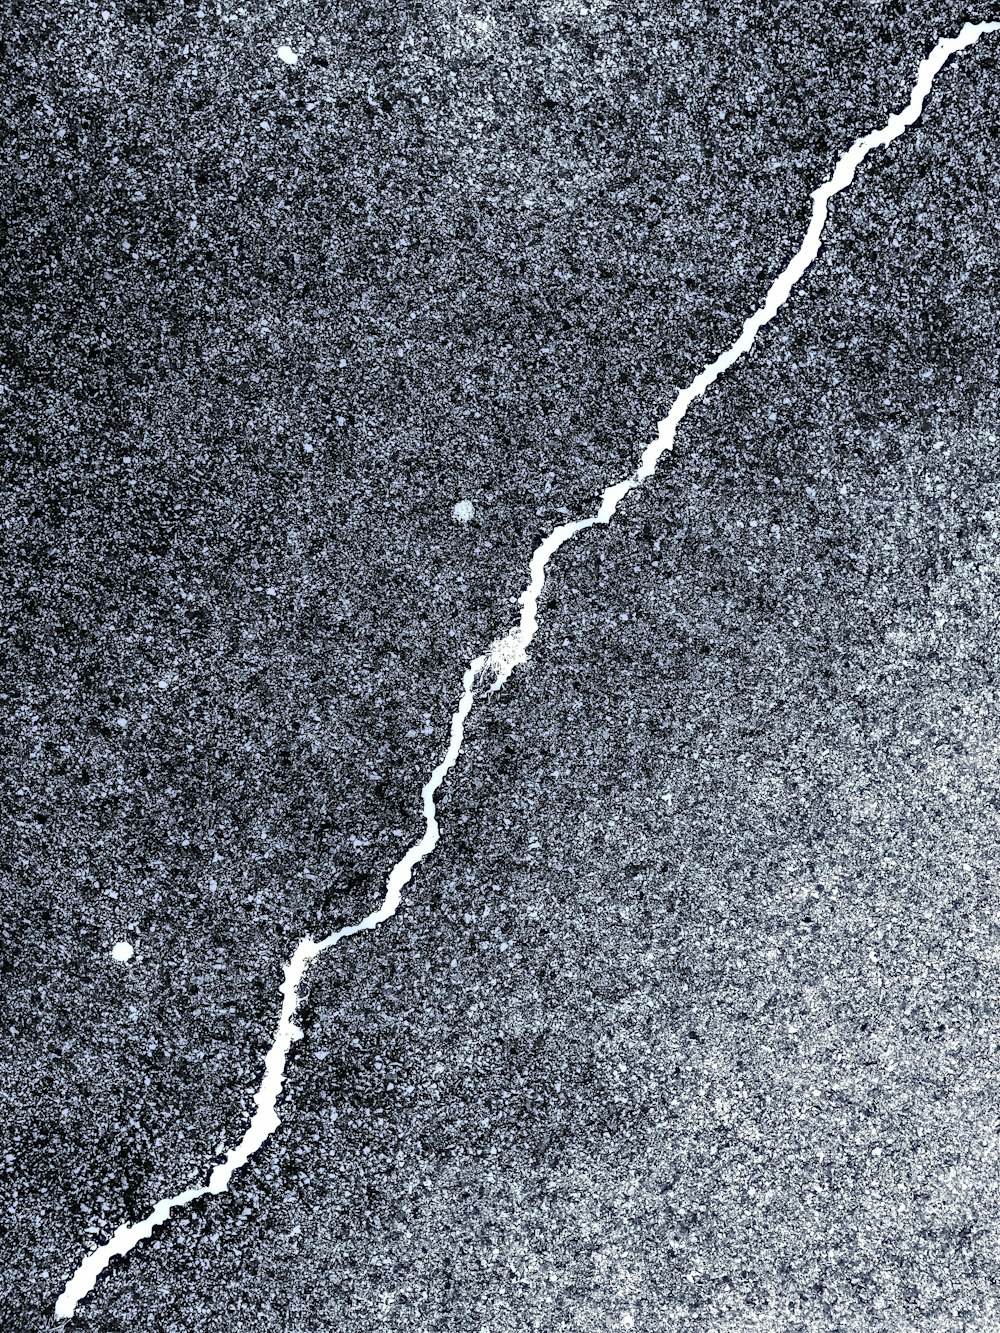 a black and white photo of a crack in the ground